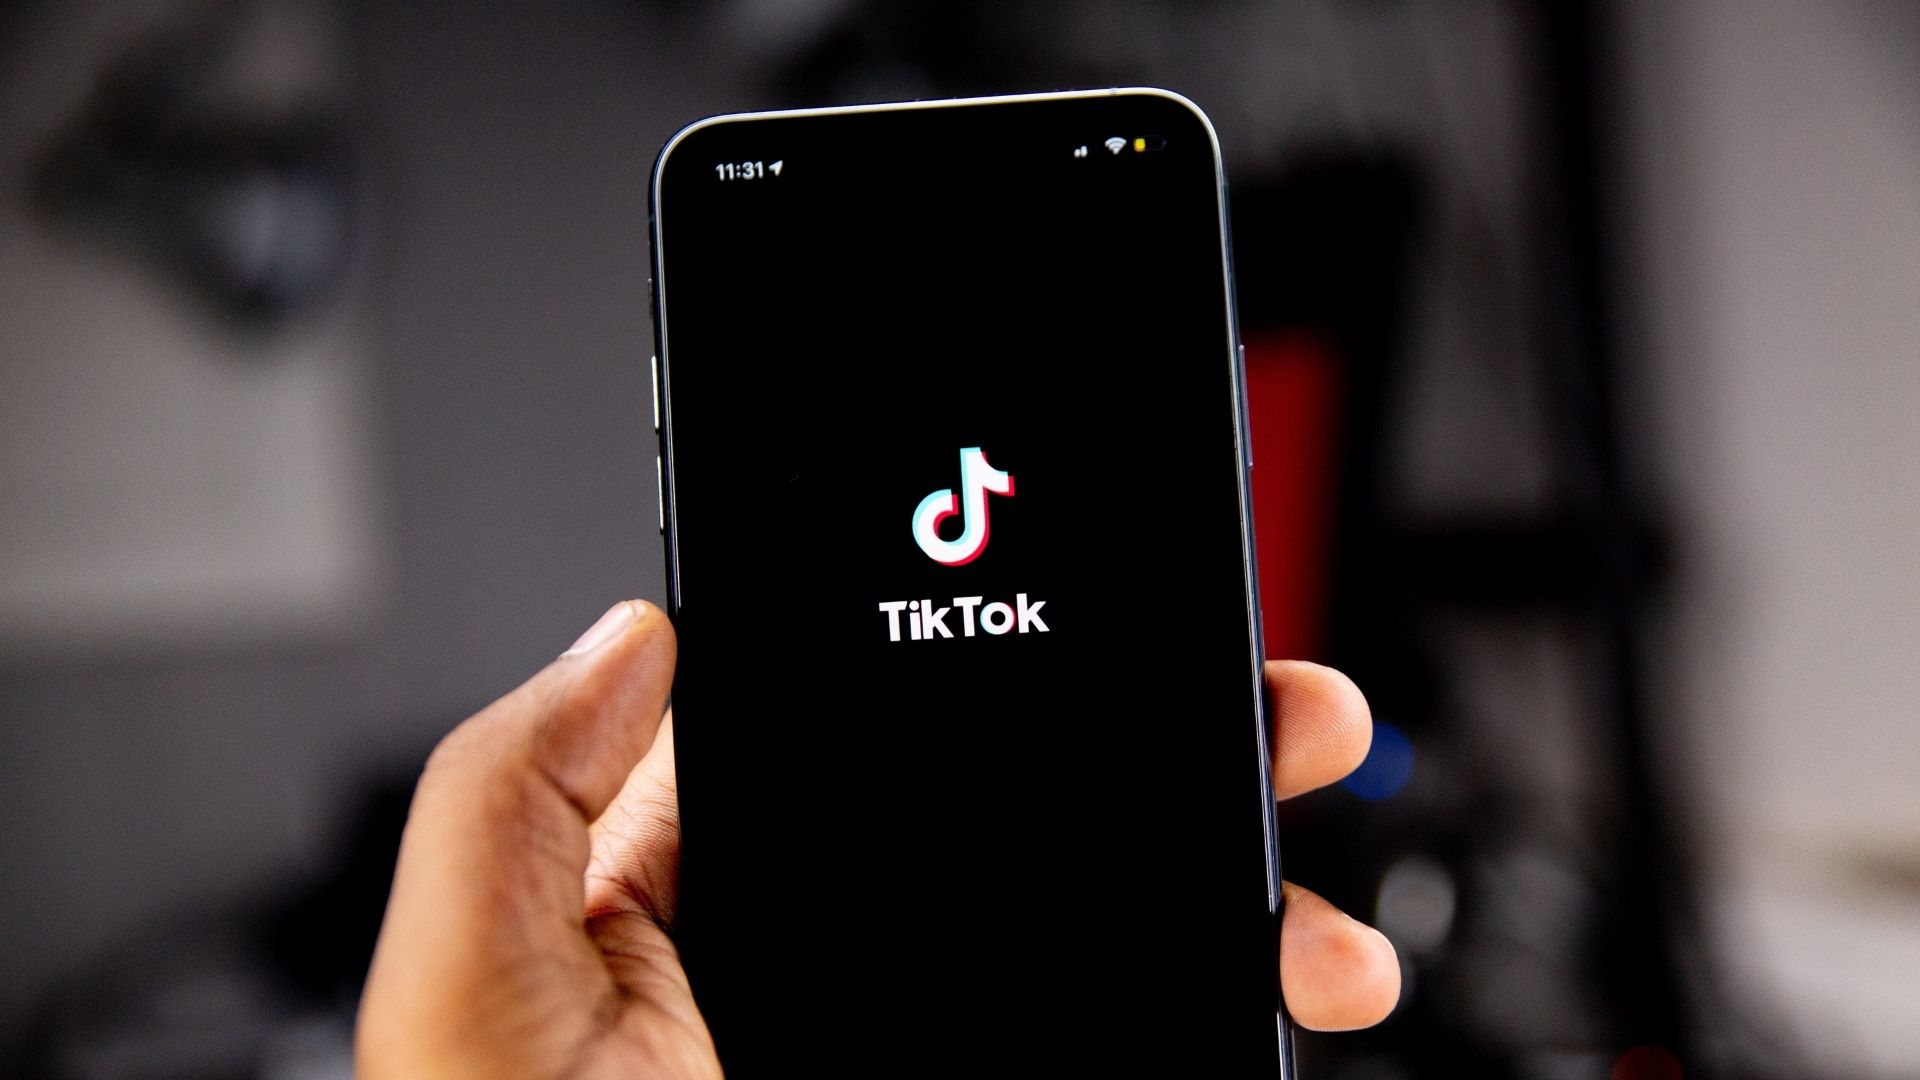 Let’s Talk About How To Promote Your Business With TikTok, marketing tips for businesses 2021, marketing tips 2021, marketing tips for small businesses 2021, tiktok tips for businesses 2021